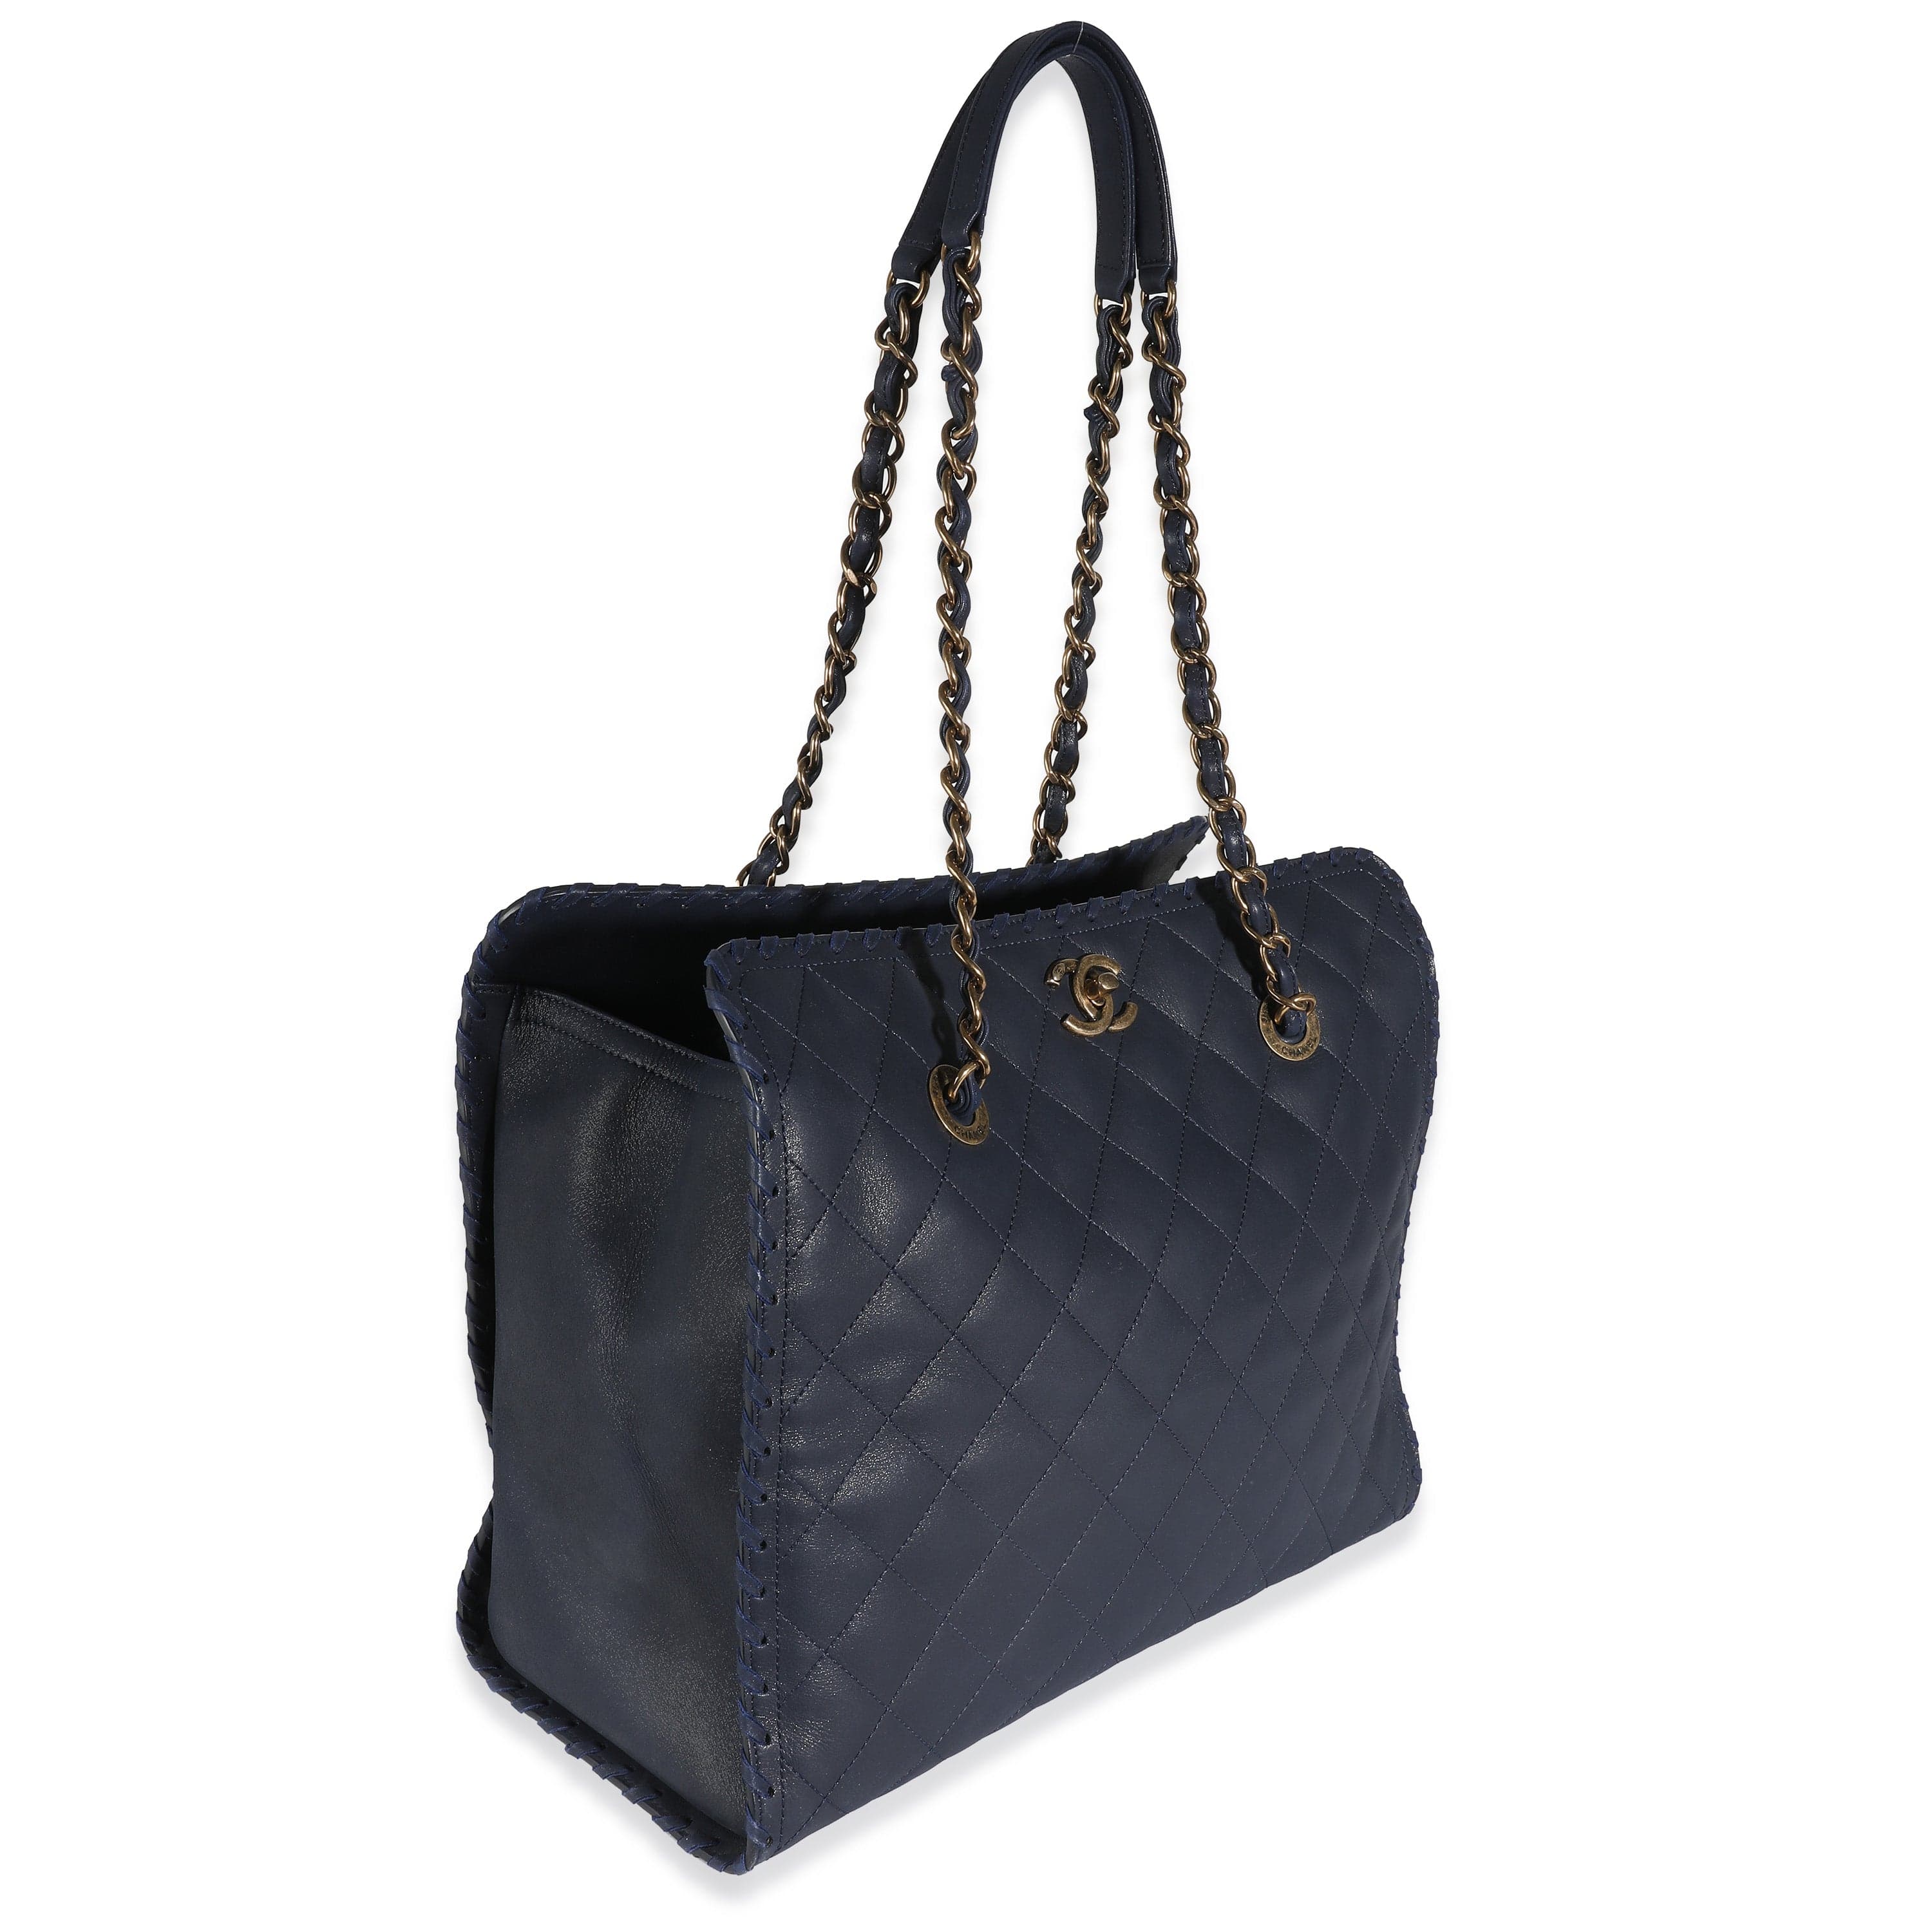 Chanel Chanel Navy Iridescent Quilted Calfskin Happy Stitch Tote